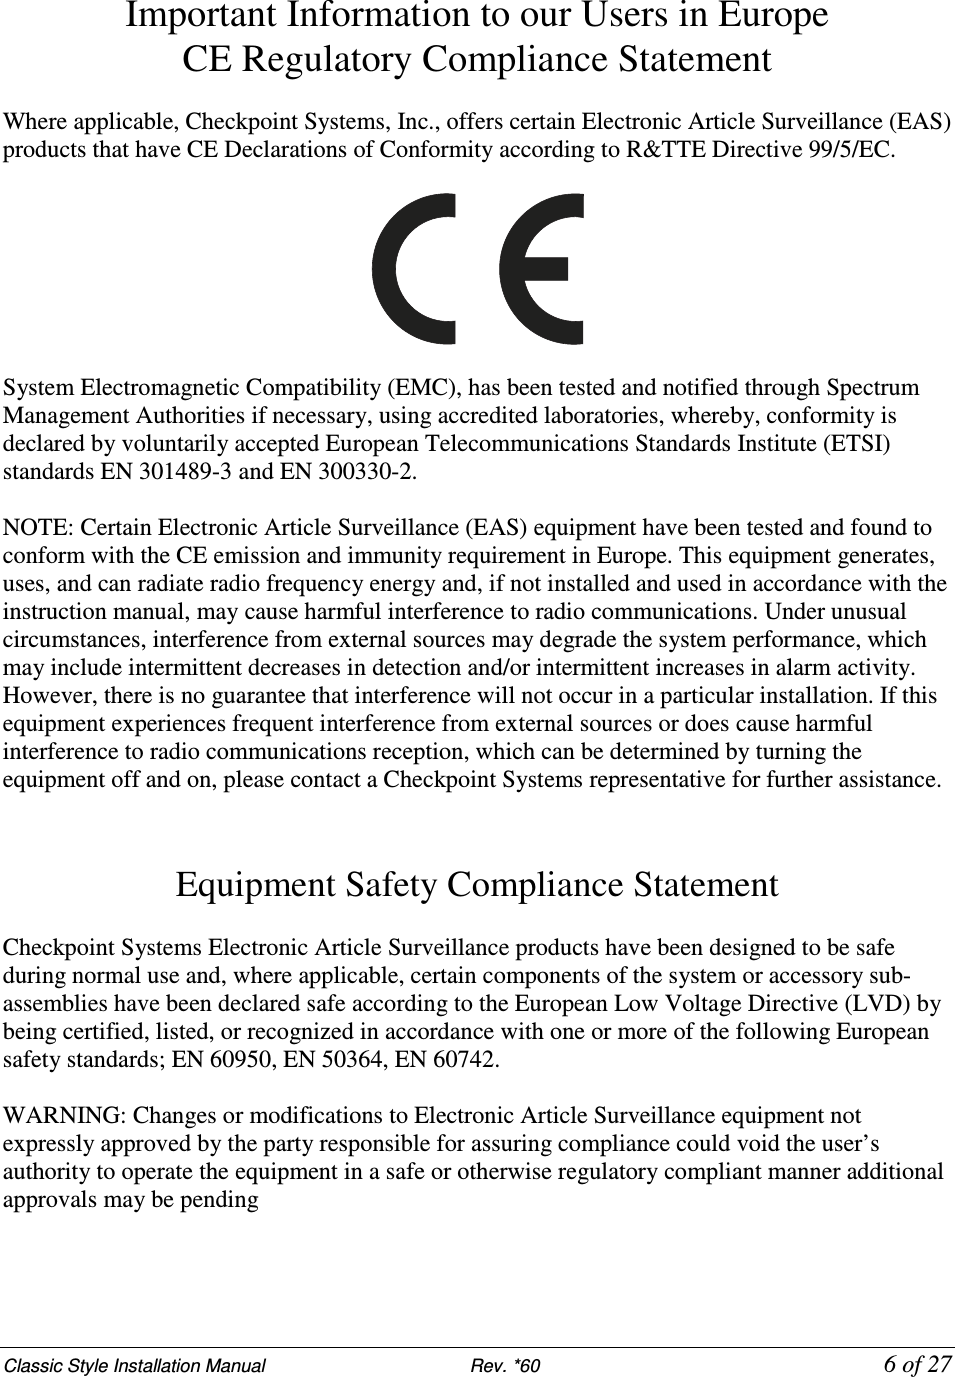 Classic Style Installation Manual                           Rev. *60           6 of 27 Important Information to our Users in Europe CE Regulatory Compliance Statement  Where applicable, Checkpoint Systems, Inc., offers certain Electronic Article Surveillance (EAS) products that have CE Declarations of Conformity according to R&amp;TTE Directive 99/5/EC.    System Electromagnetic Compatibility (EMC), has been tested and notified through Spectrum Management Authorities if necessary, using accredited laboratories, whereby, conformity is declared by voluntarily accepted European Telecommunications Standards Institute (ETSI) standards EN 301489-3 and EN 300330-2.  NOTE: Certain Electronic Article Surveillance (EAS) equipment have been tested and found to conform with the CE emission and immunity requirement in Europe. This equipment generates, uses, and can radiate radio frequency energy and, if not installed and used in accordance with the instruction manual, may cause harmful interference to radio communications. Under unusual circumstances, interference from external sources may degrade the system performance, which may include intermittent decreases in detection and/or intermittent increases in alarm activity. However, there is no guarantee that interference will not occur in a particular installation. If this equipment experiences frequent interference from external sources or does cause harmful interference to radio communications reception, which can be determined by turning the equipment off and on, please contact a Checkpoint Systems representative for further assistance.   Equipment Safety Compliance Statement  Checkpoint Systems Electronic Article Surveillance products have been designed to be safe during normal use and, where applicable, certain components of the system or accessory sub-assemblies have been declared safe according to the European Low Voltage Directive (LVD) by being certified, listed, or recognized in accordance with one or more of the following European safety standards; EN 60950, EN 50364, EN 60742.  WARNING: Changes or modifications to Electronic Article Surveillance equipment not expressly approved by the party responsible for assuring compliance could void the user’s authority to operate the equipment in a safe or otherwise regulatory compliant manner additional approvals may be pending